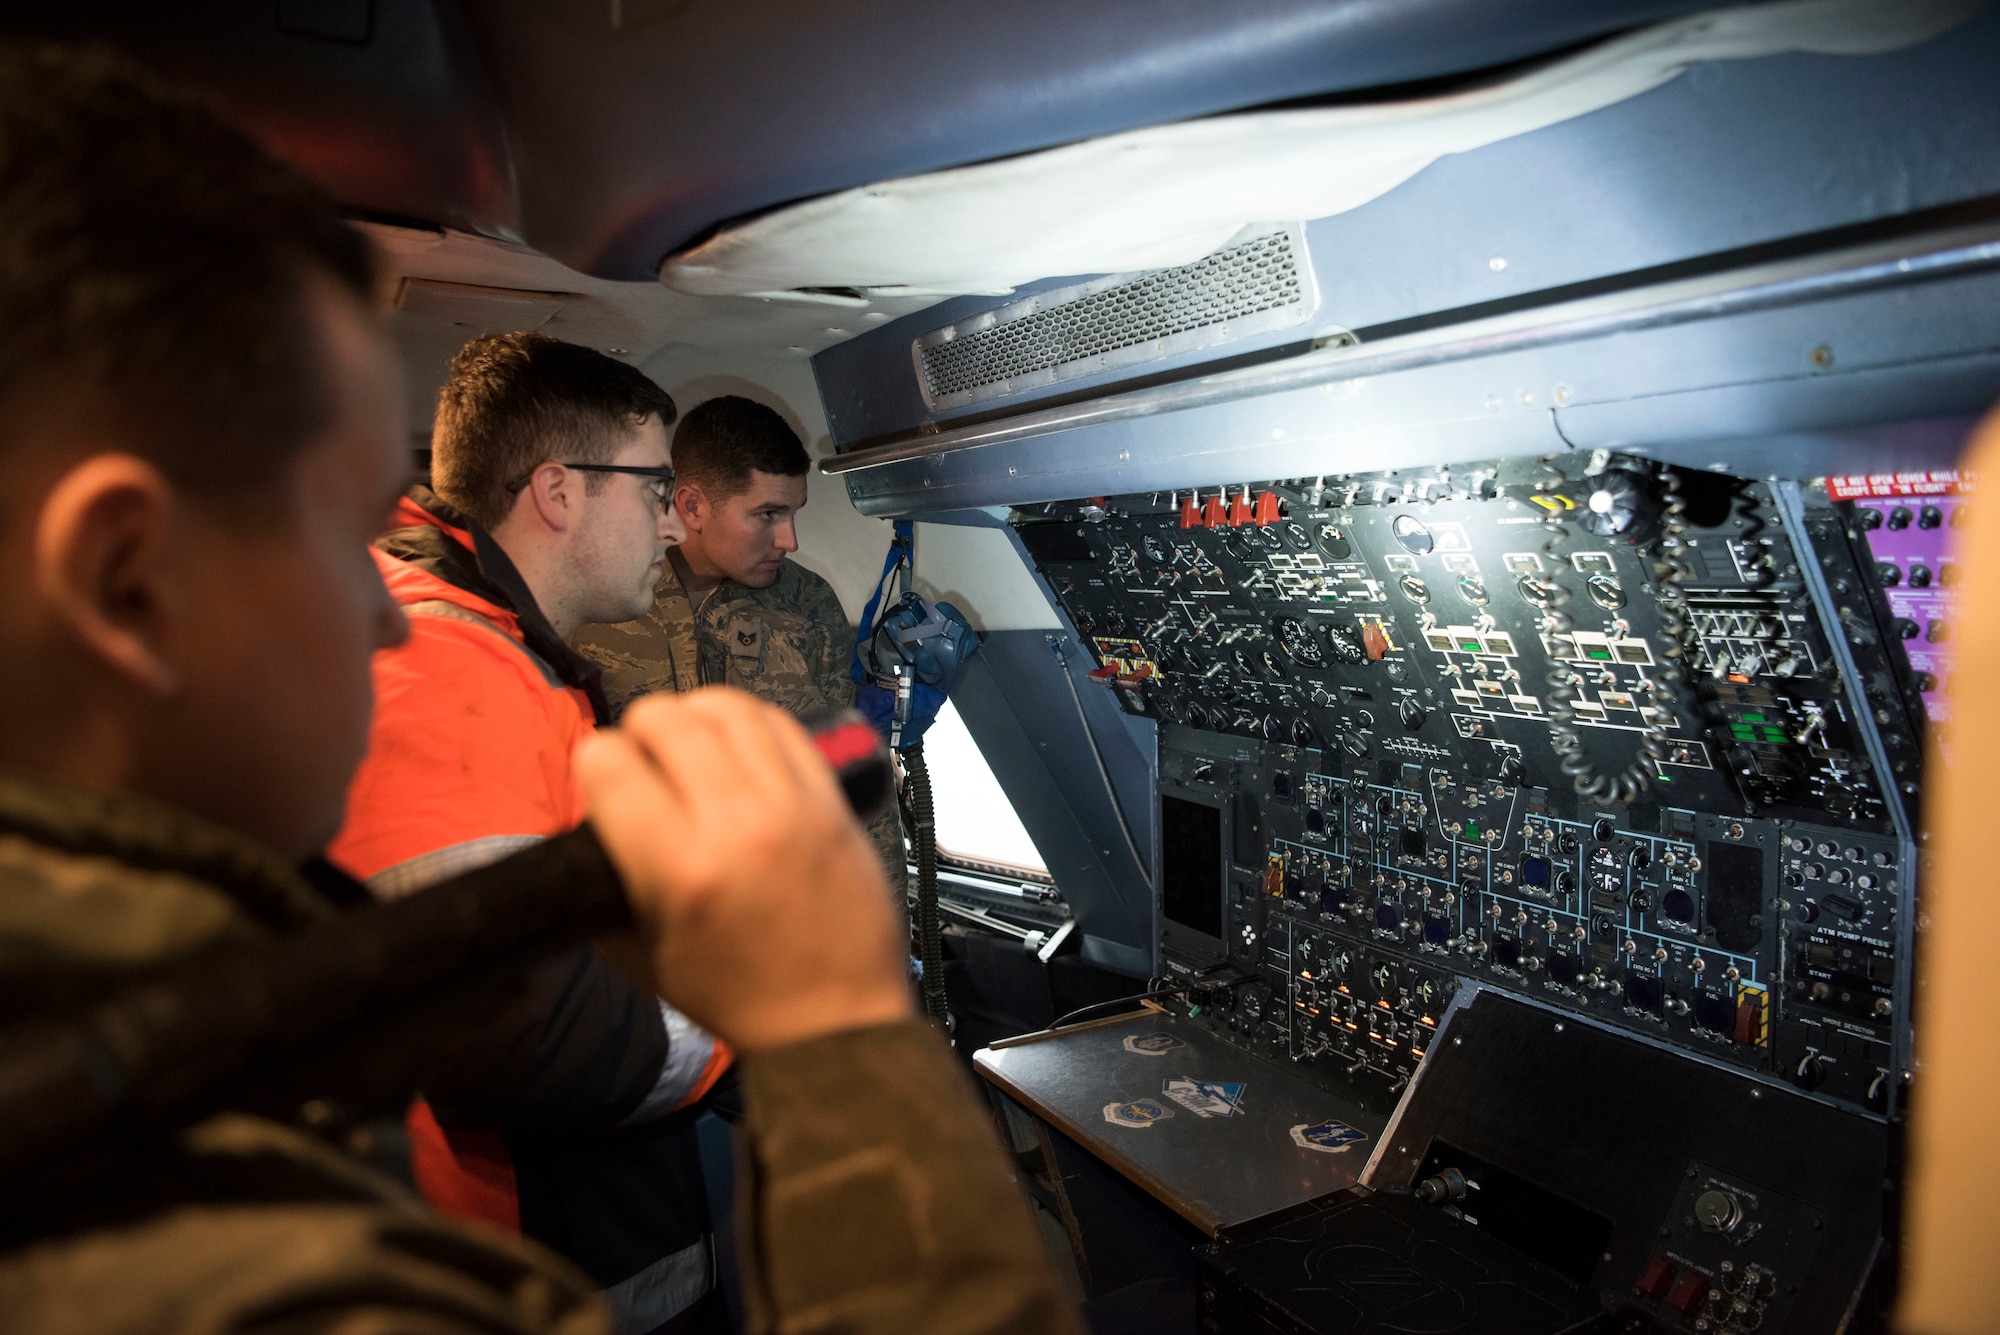 U.S. Air Force Staff Sgt. Ryan Johnson, 521st Air Mobility Operations Wing regional training center crew chief, illuminates part of the cockpit in the C-5M Super Galaxy aircraft while he quizzes Airmen on running auxiliary power units Dec. 3, 2018, on Ramstein Air Base, Germany. The Airmen in this course belonged to the 725th Aircraft Maintenance Squadron from Naval Station Rota, Spain and the 726th AMS from Spangdahlem Air Base, Germany. (U.S. Air Force photo by Airman 1st Class Kristof J. Rixmann)